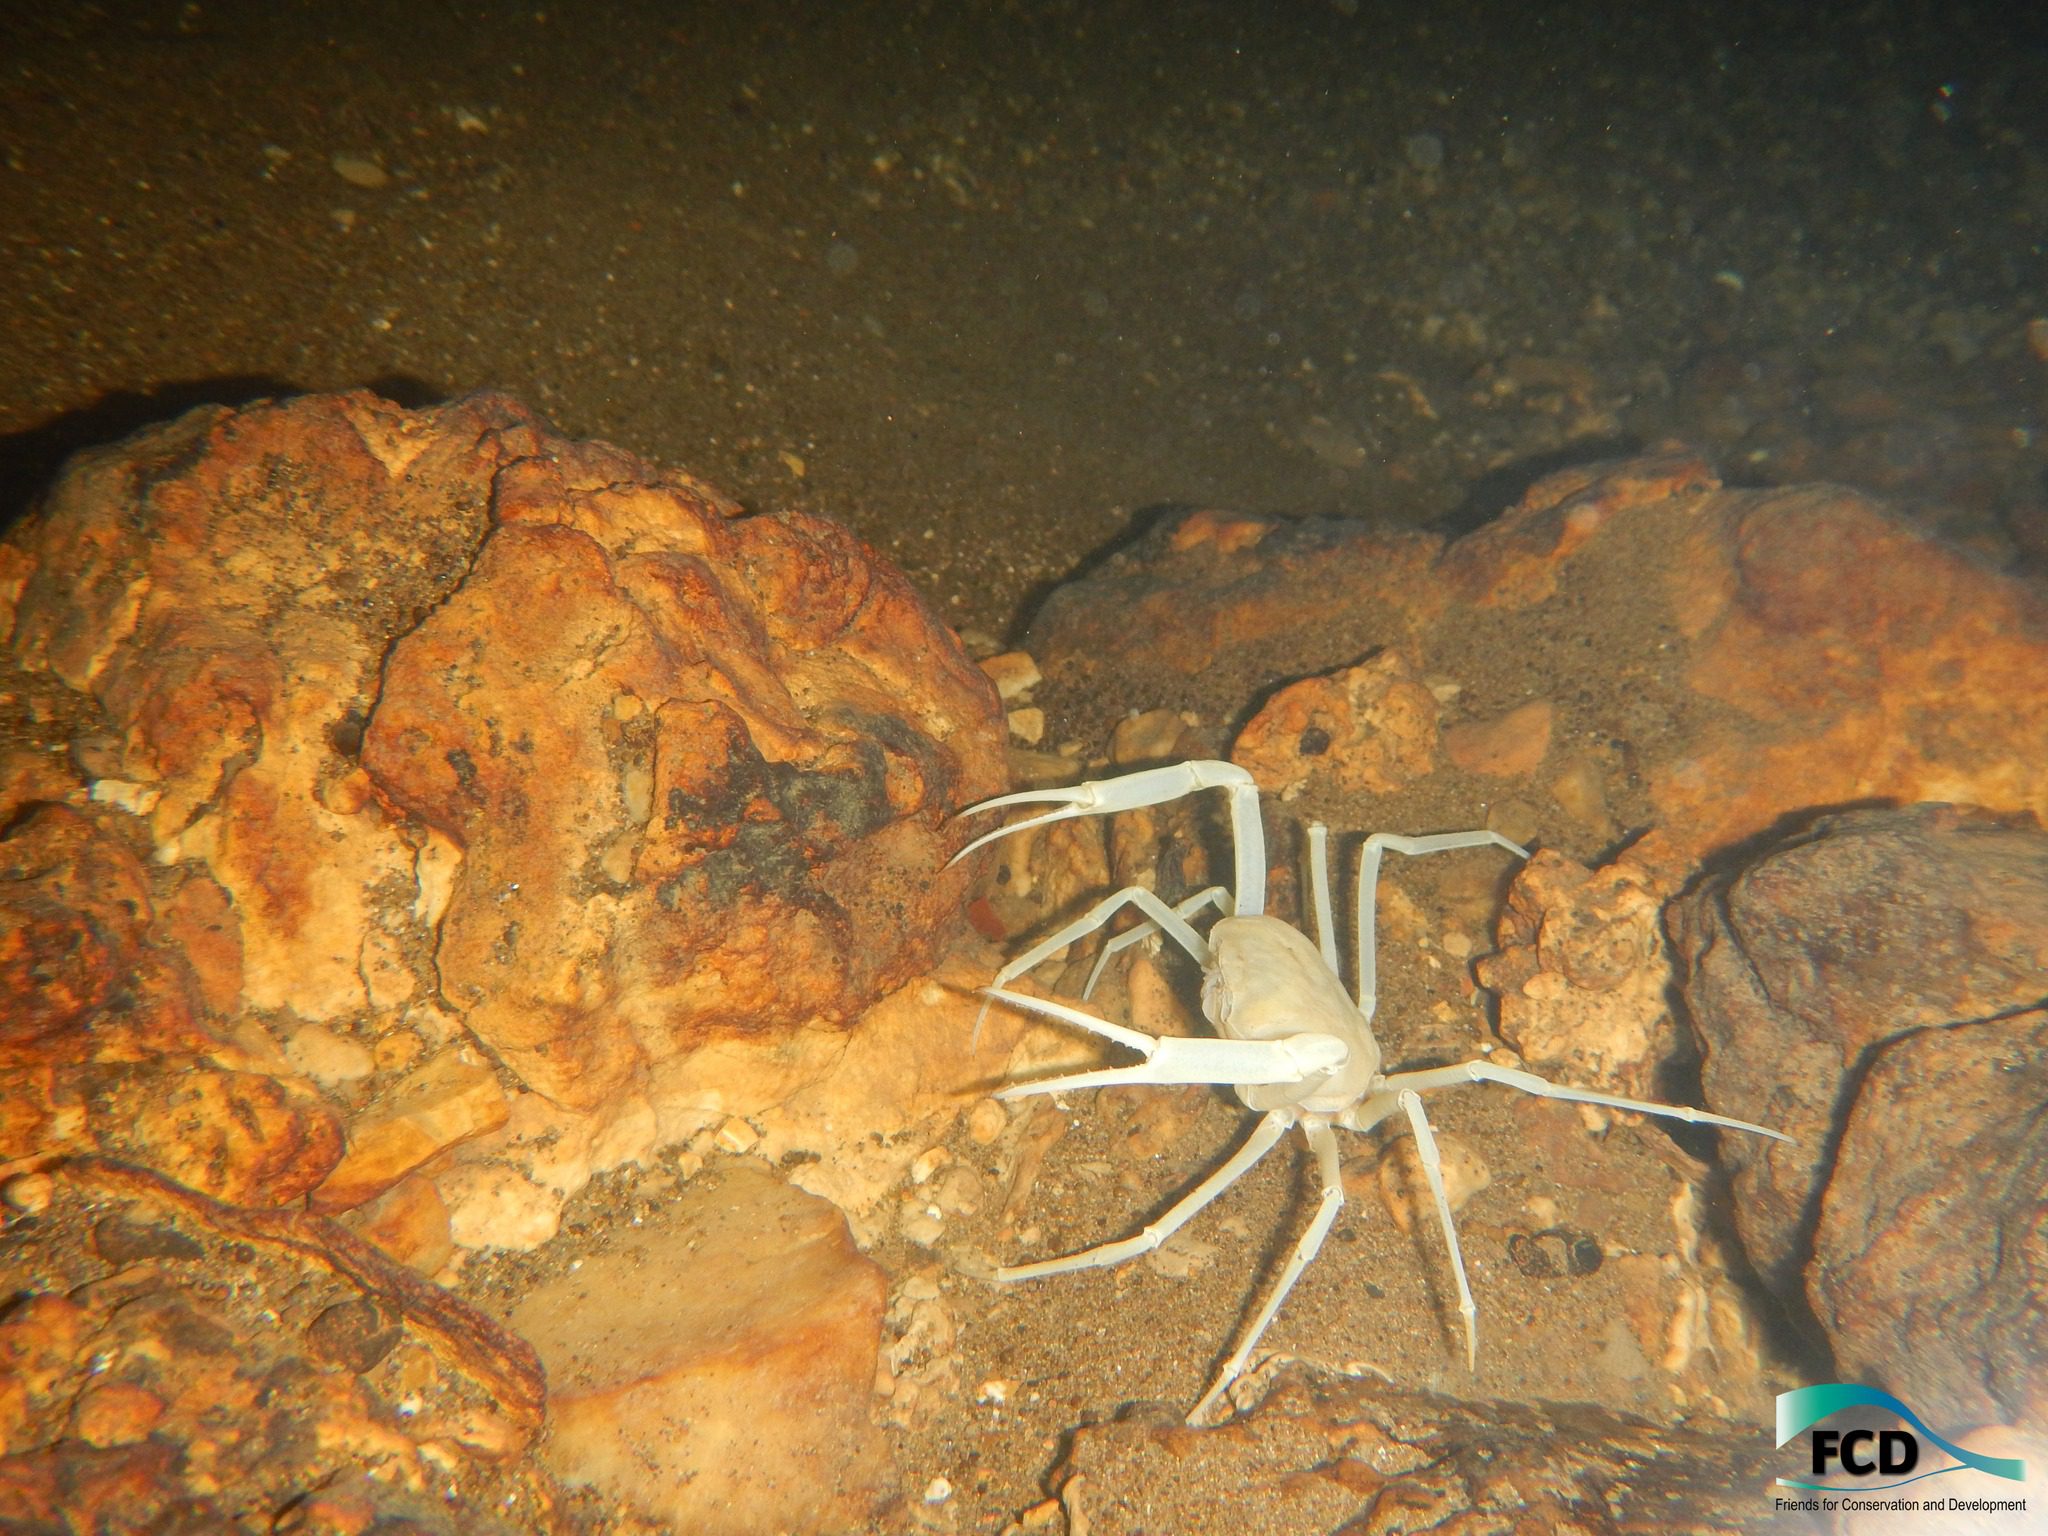 Did you know that the Chiquibul Cave System is home to the Blind Cave Crab (Typhlopseudothelphusa acanthochela)?